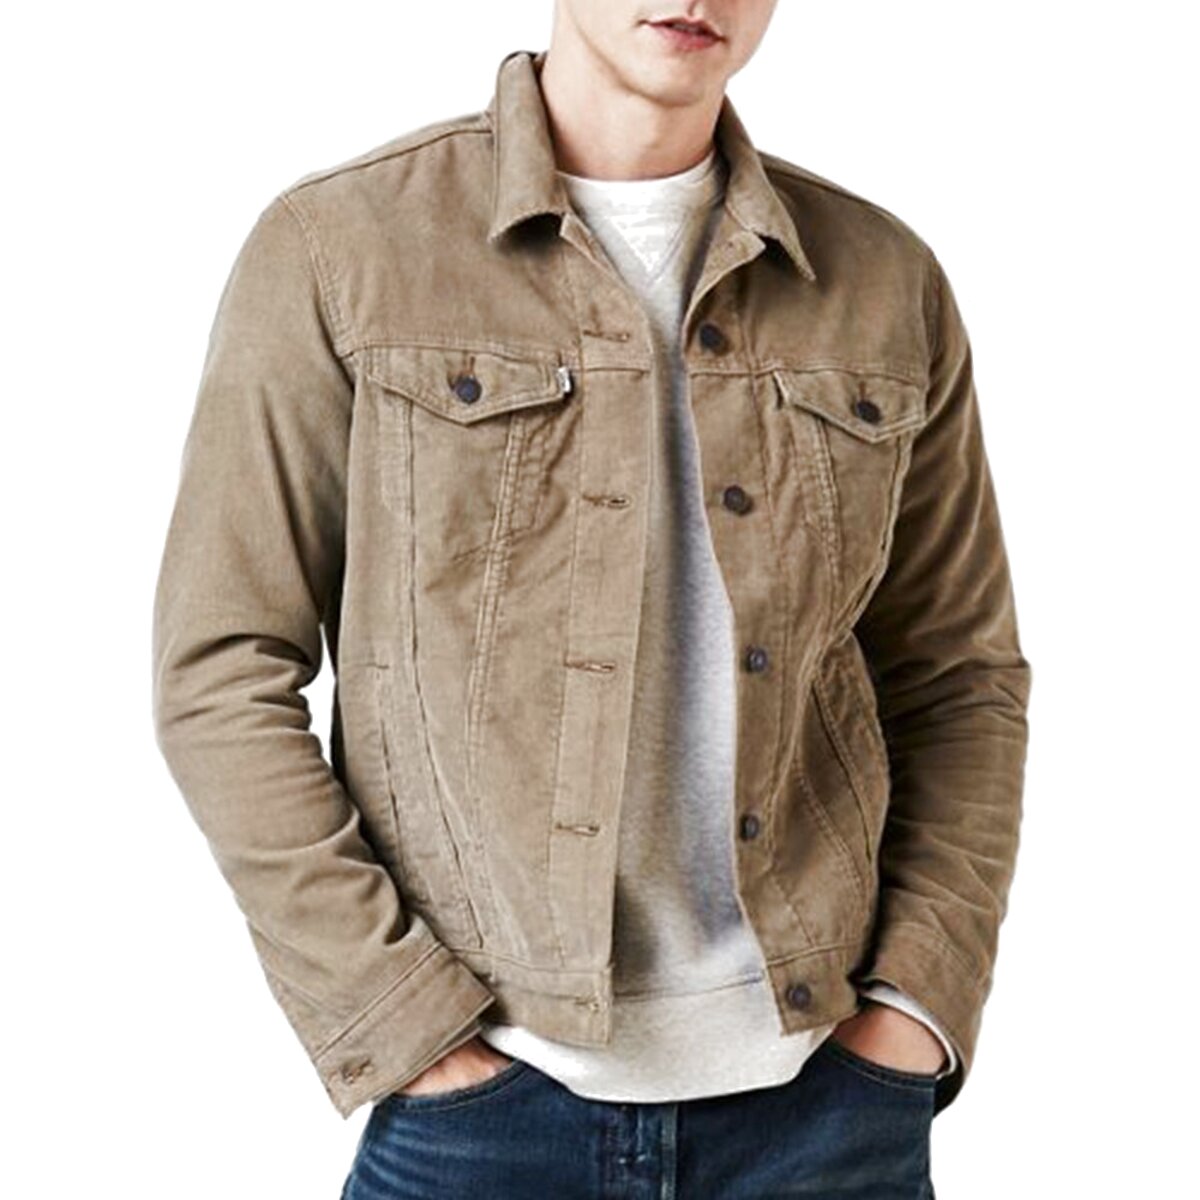 Levis Cord Jacket for sale in UK | 62 used Levis Cord Jackets